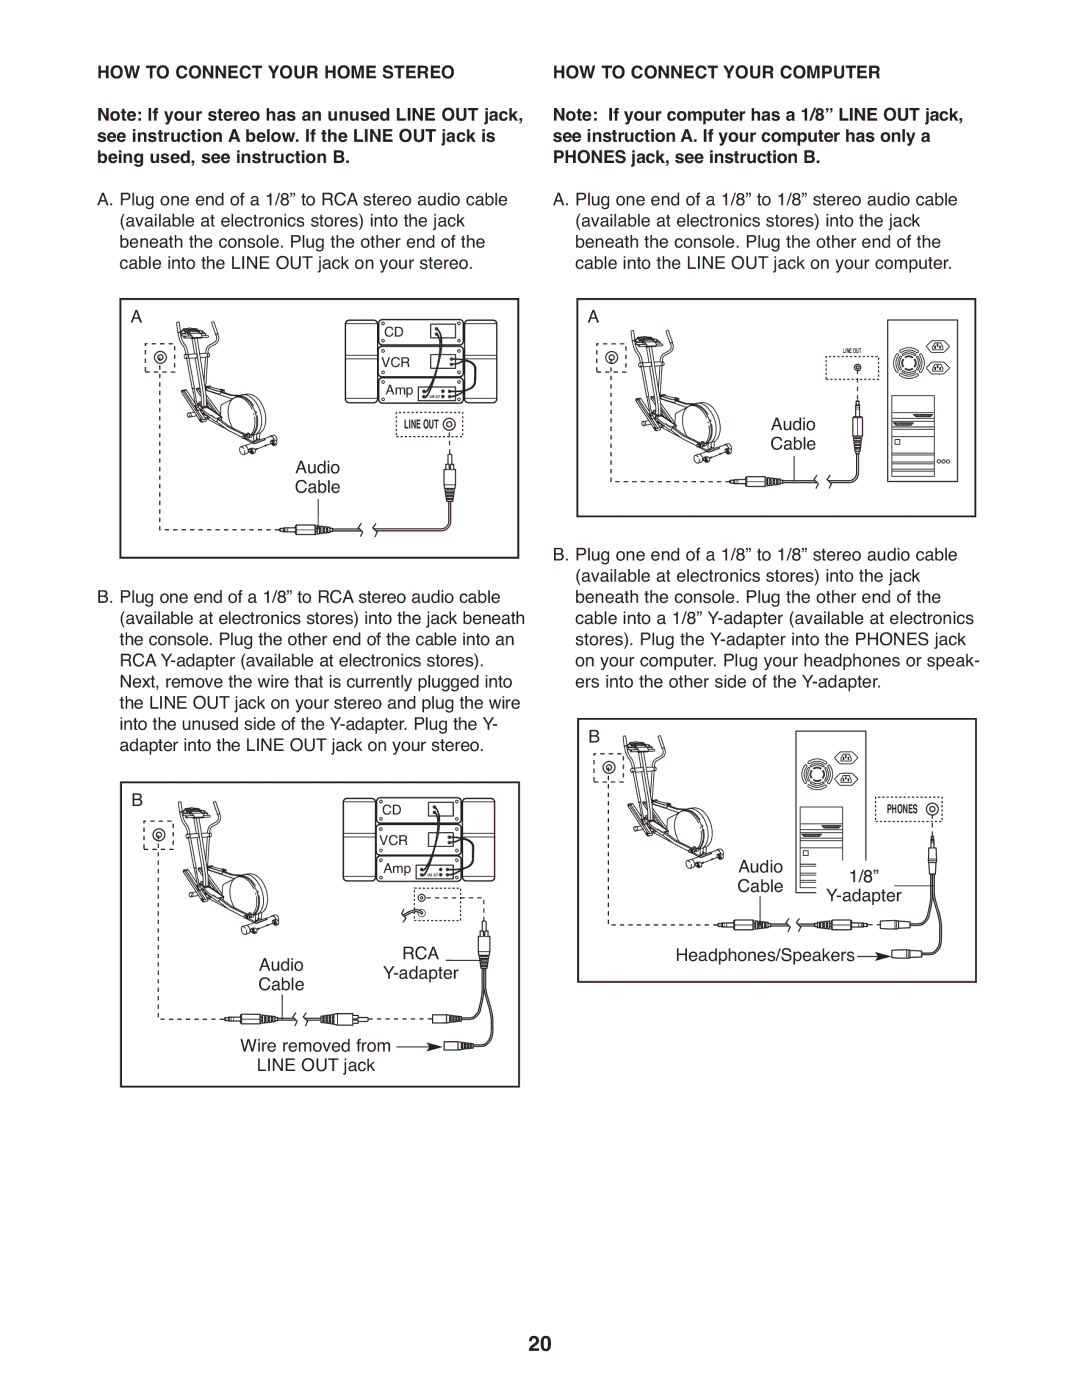 ProForm 831.28544.0 user manual HOW to Connect Your Home Stereo, HOW to Connect Your Computer 